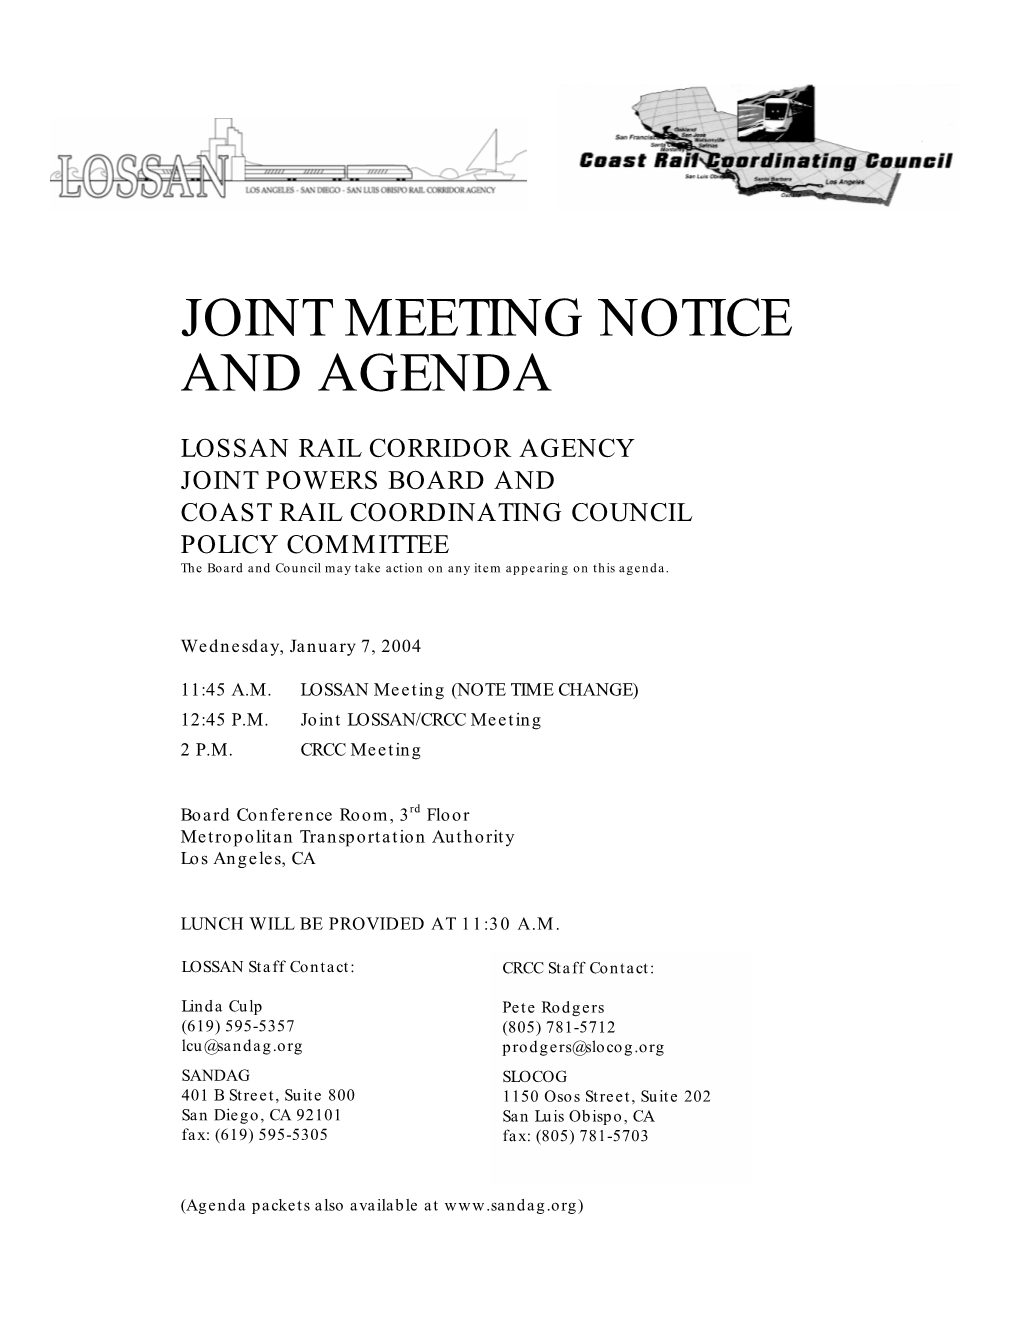 Joint Meeting Notice and Agenda